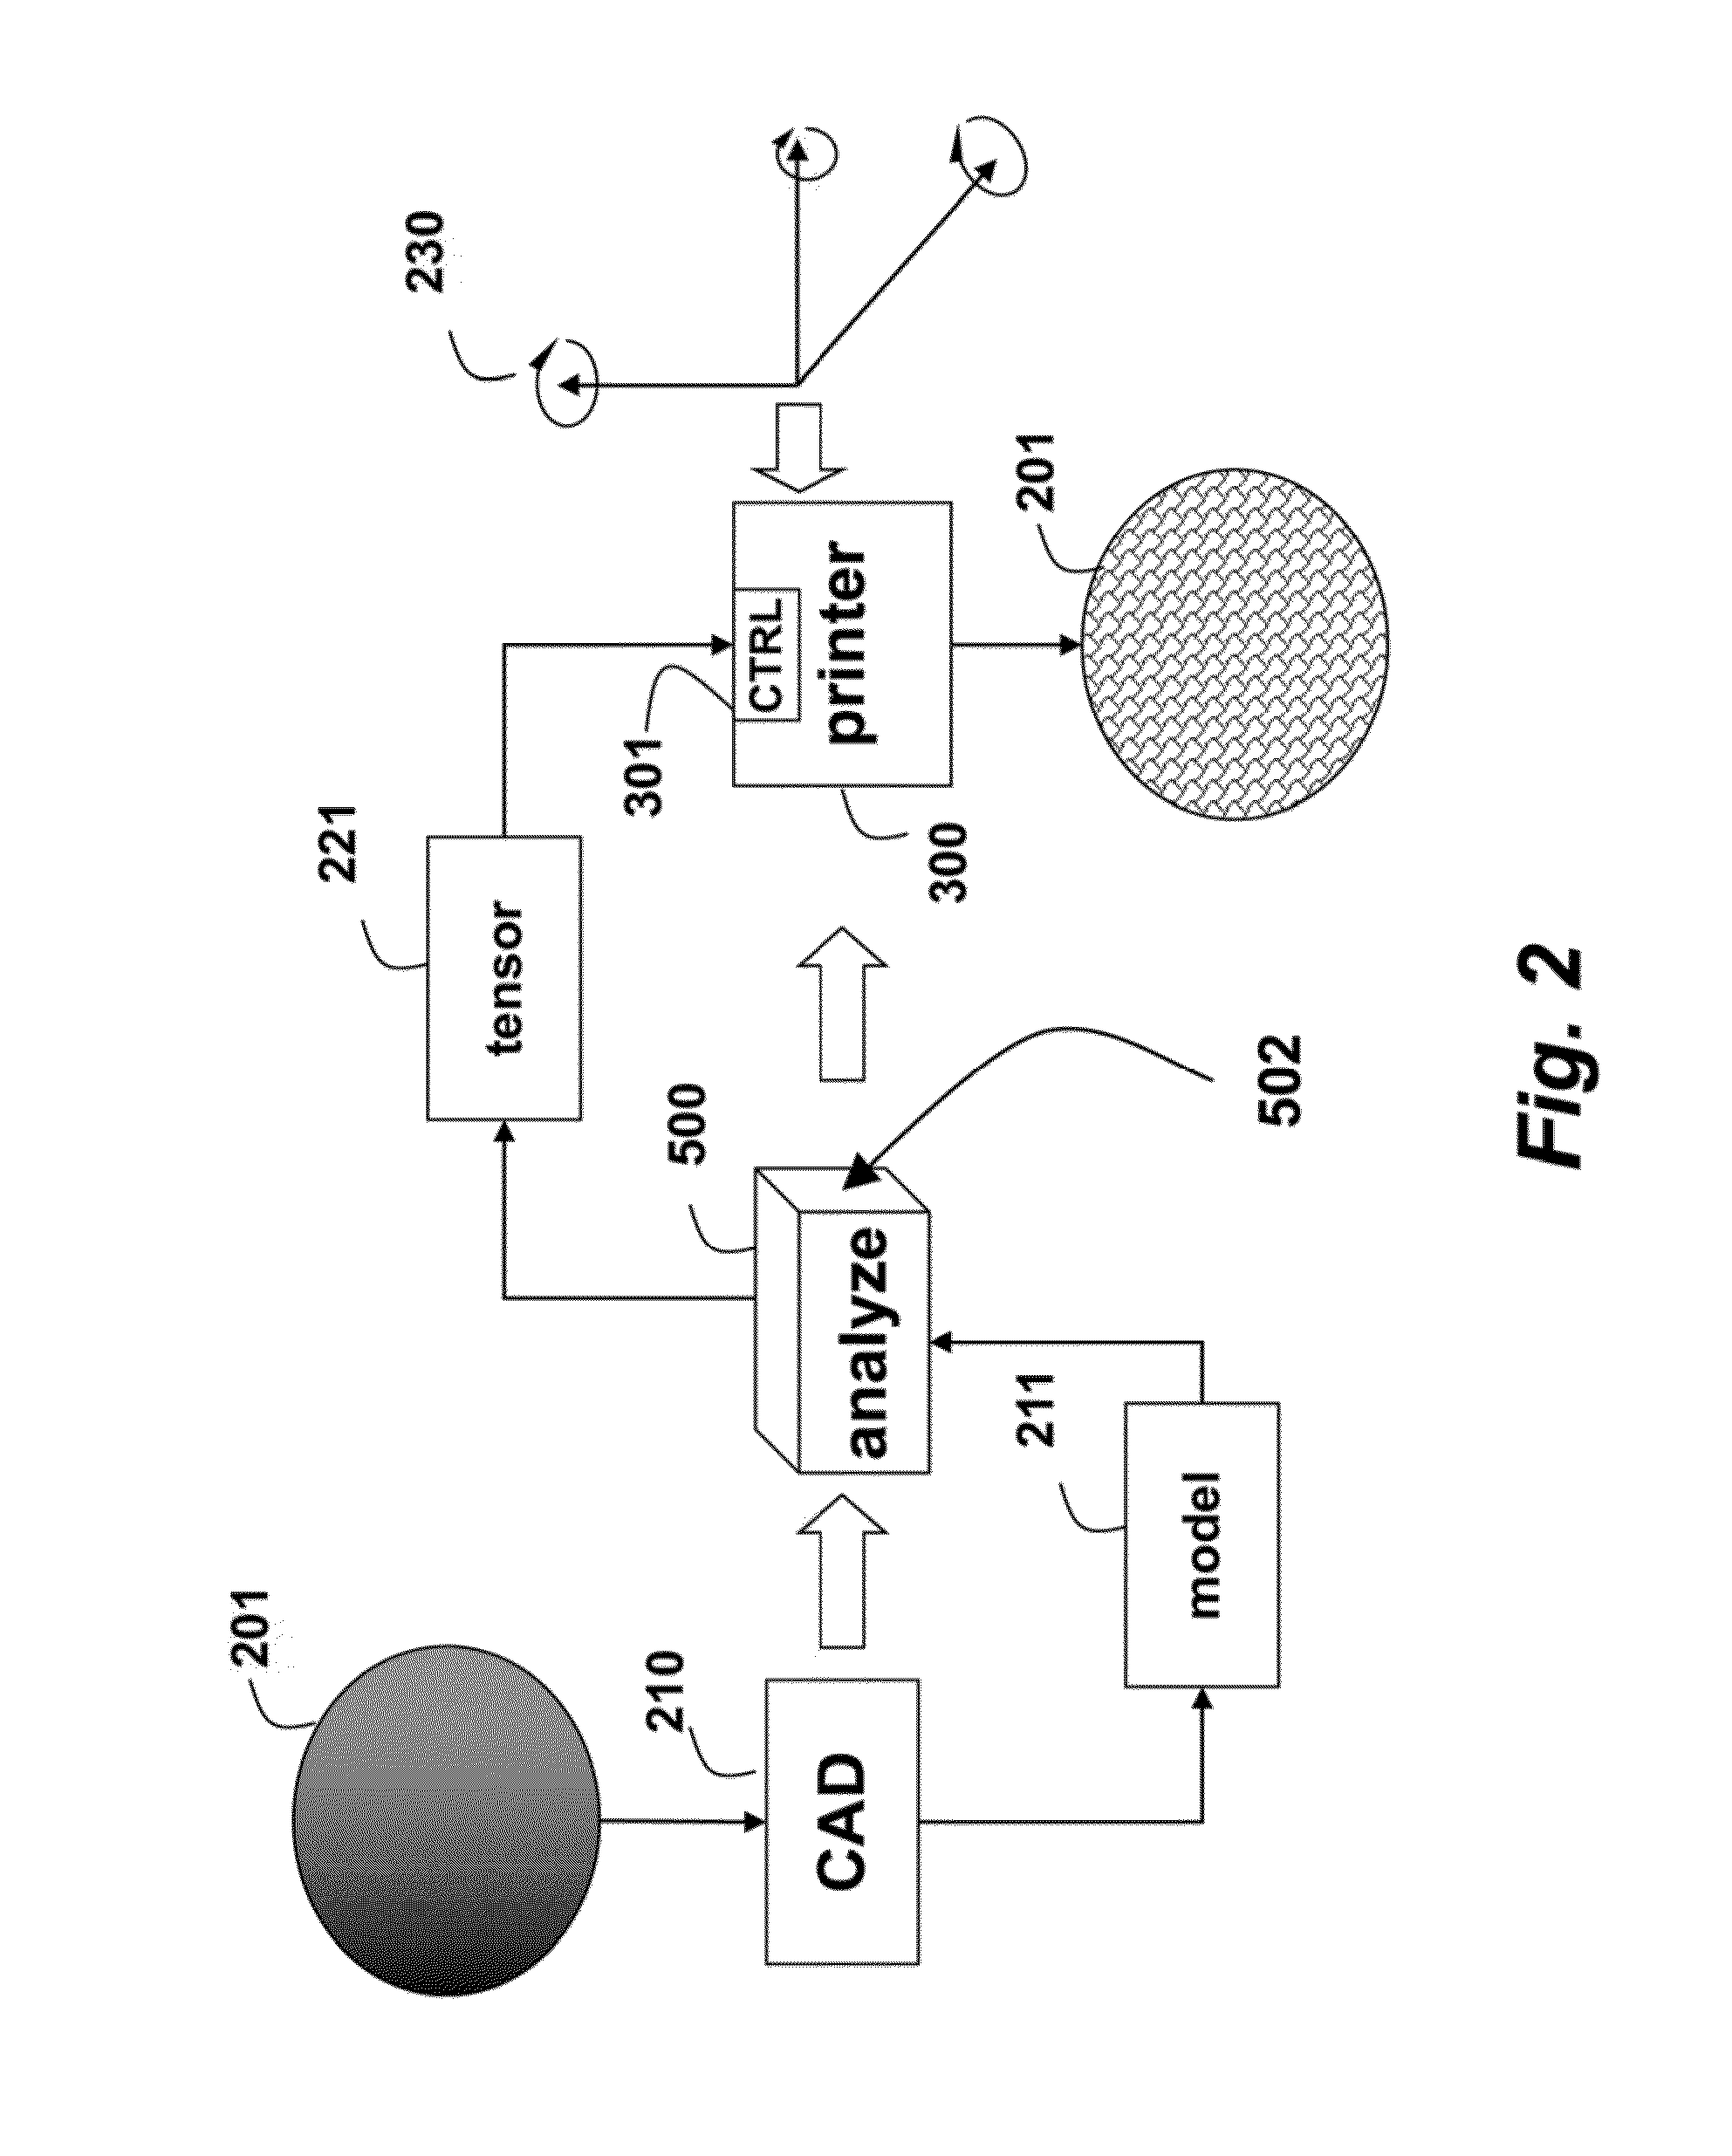 Method and Apparatus for Printing 3D Objects Using Additive Manufacturing and Material Extruder with Translational and Rotational Axes